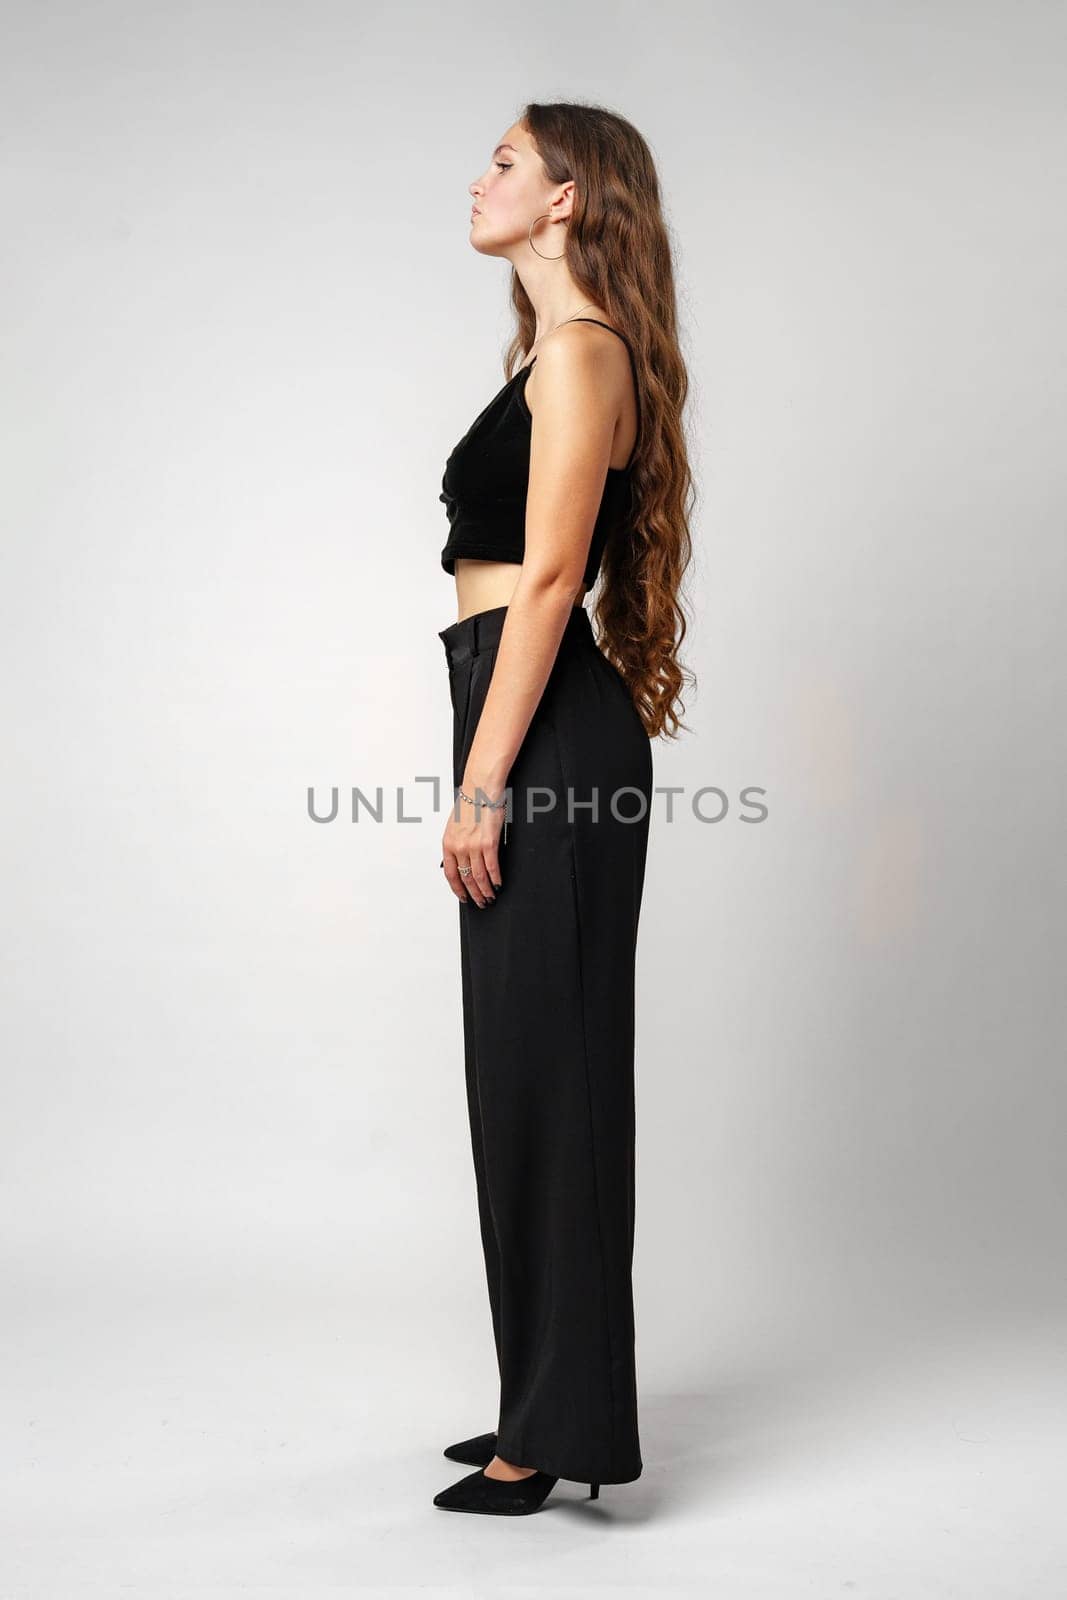 A woman is standing confidently in a black crop top and pants. She exudes strength and poise in her outfit, emanating a sense of empowerment and style.